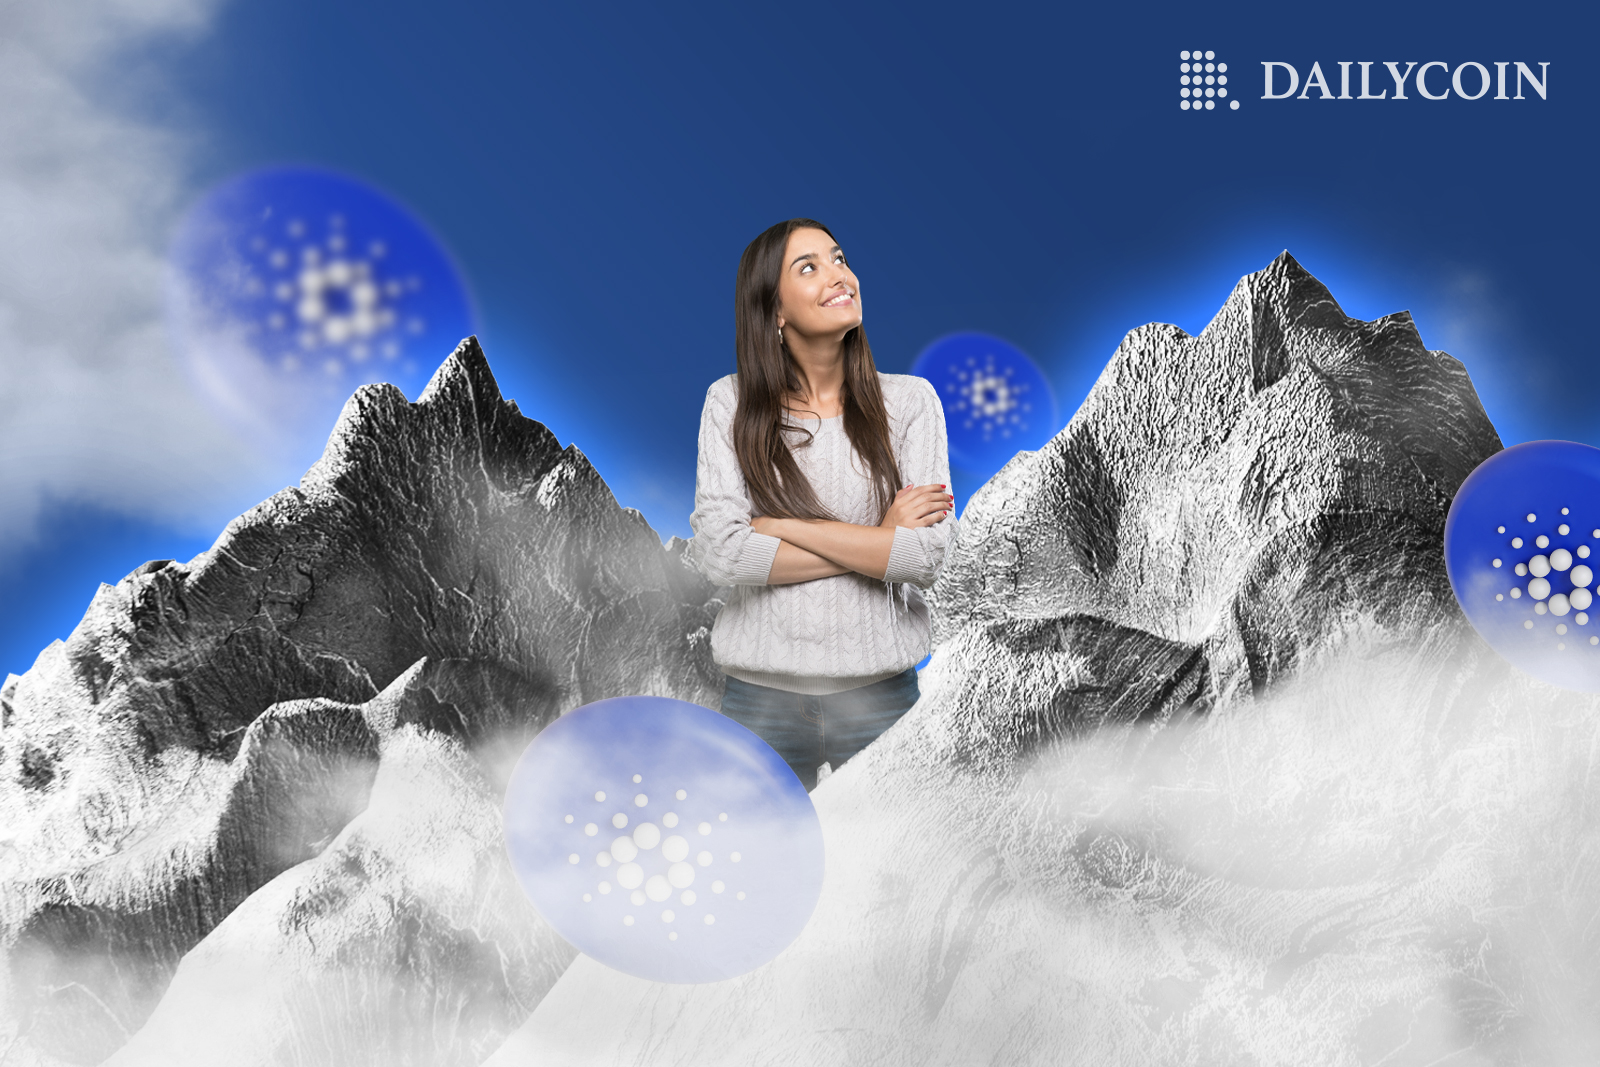 Cardano (ADA) Climbs mountains chart with smiling woman